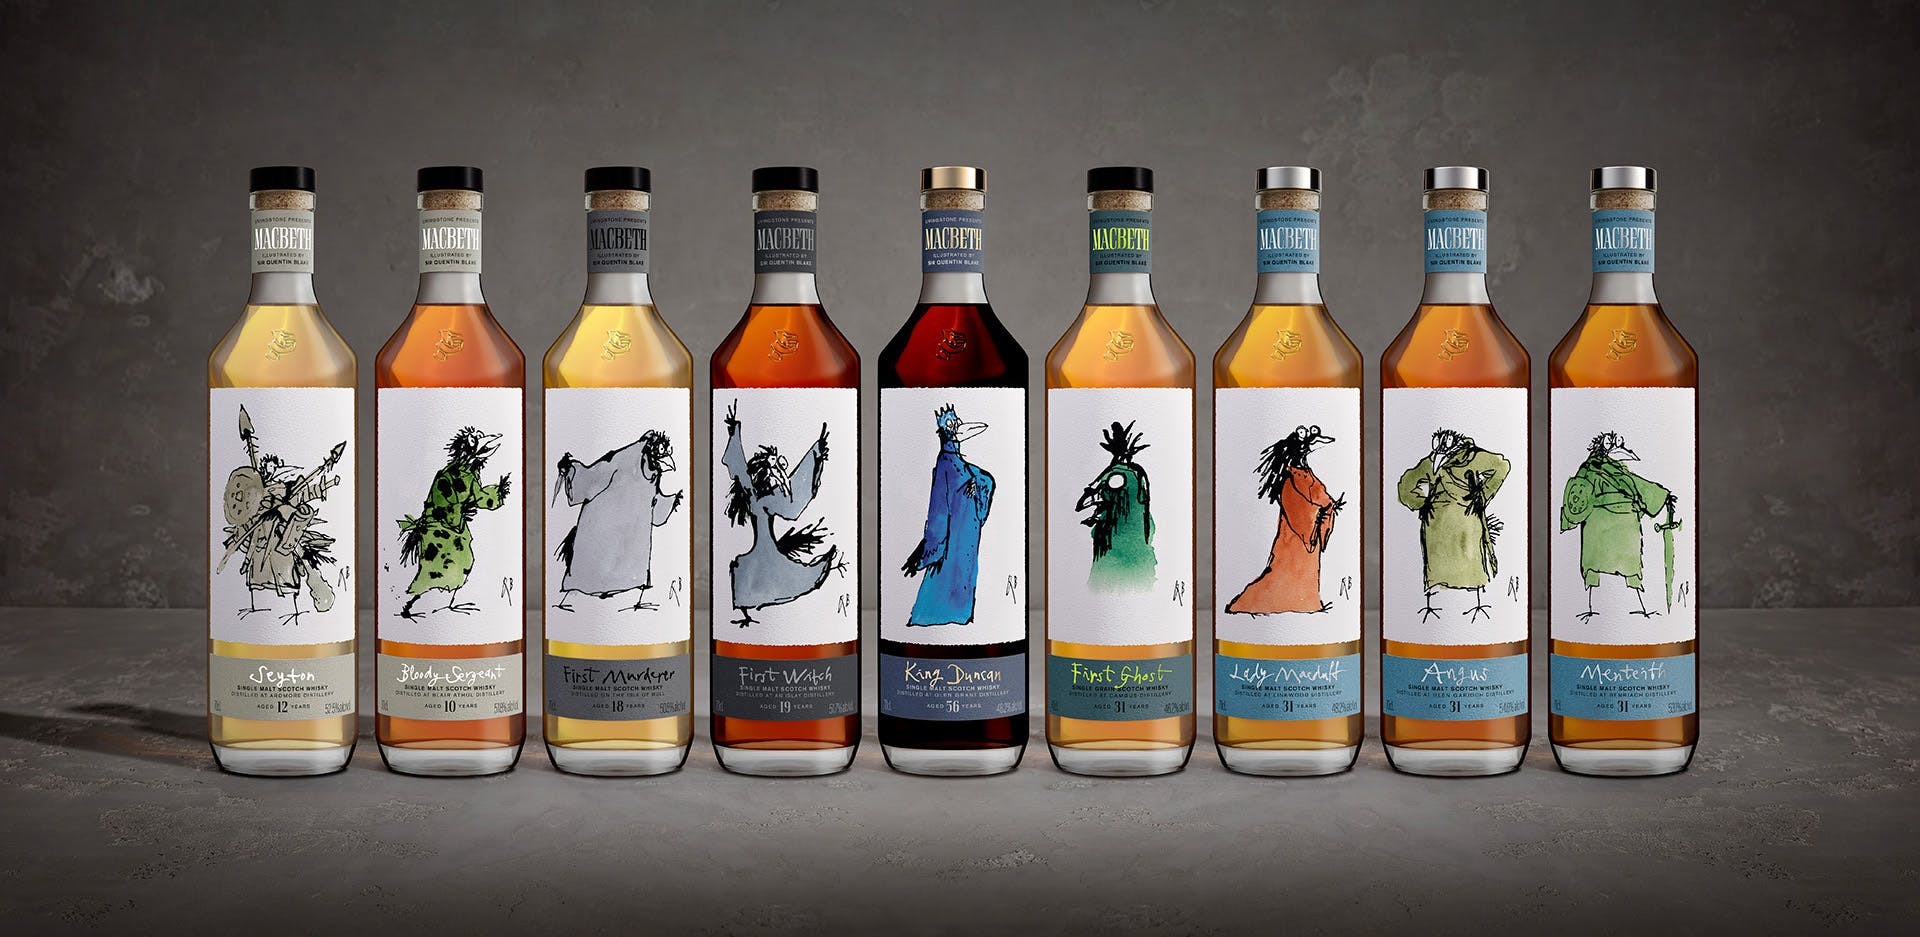 Photograph showing the nine bottles in the Macbeth whisky collection featuring illustrations on the bottles showing different characters drawn as birds by Quentin Blake